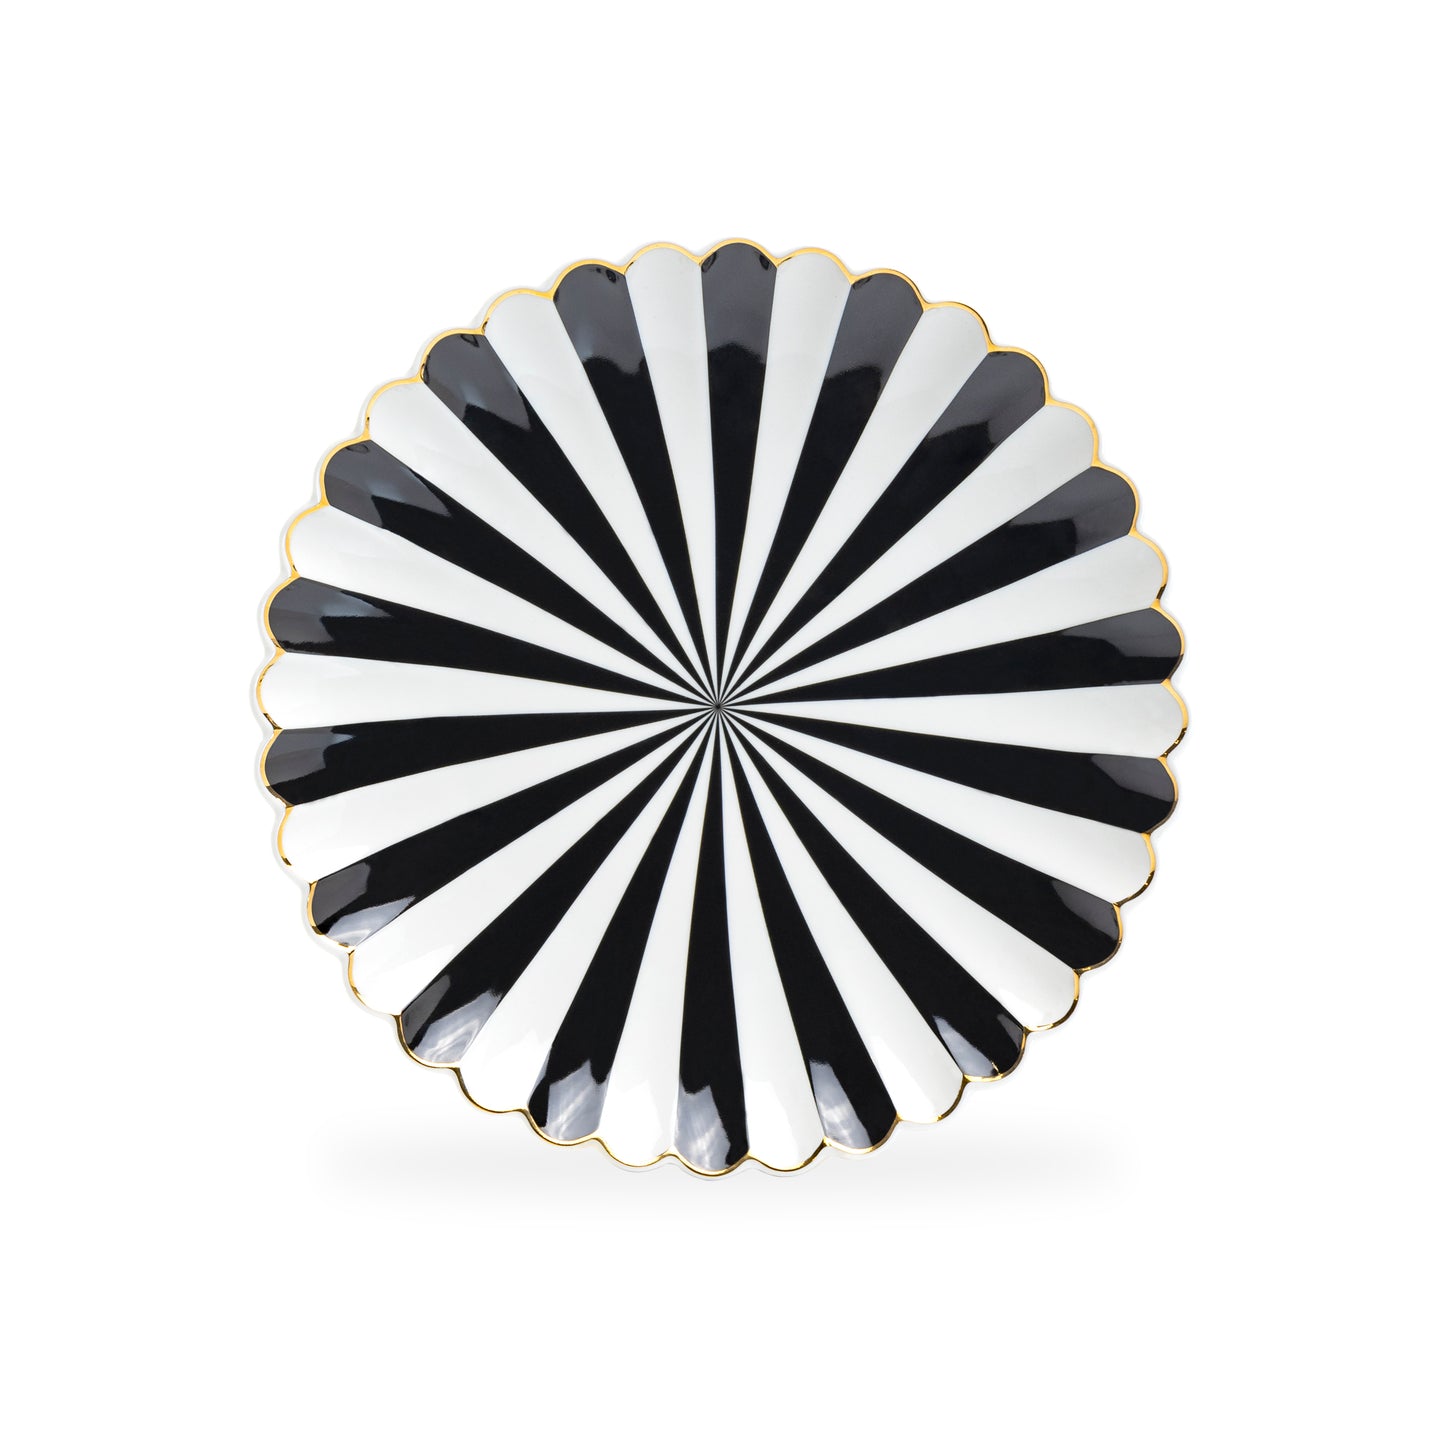 Black and White Scallop Fine Porcelain Tea Cup and Saucer